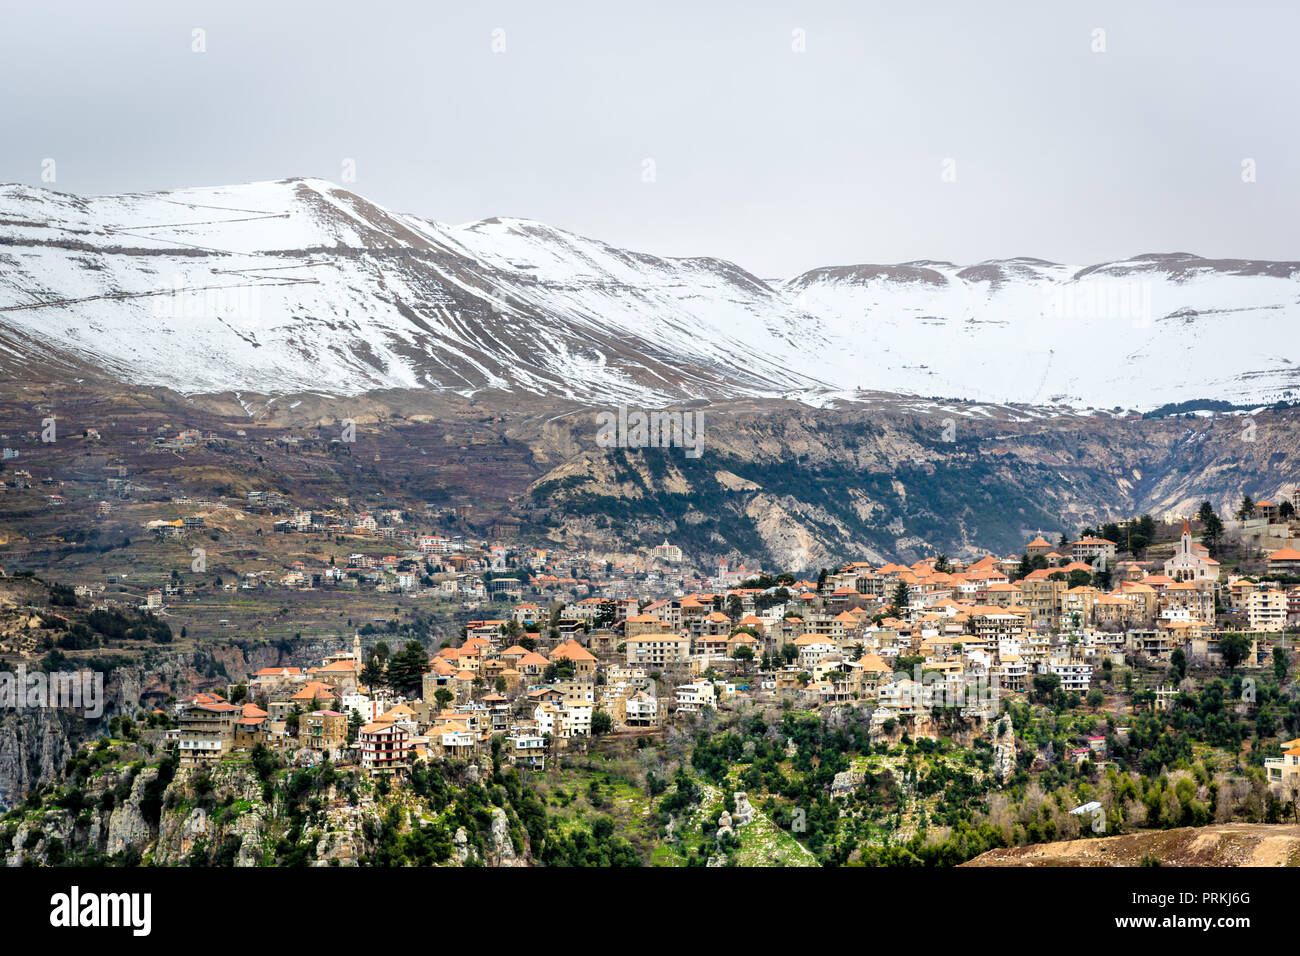 Amazing city in the valleys of the Lebanon, snowcape mountains, cloudy day, beuatiful landscape Stock Photo